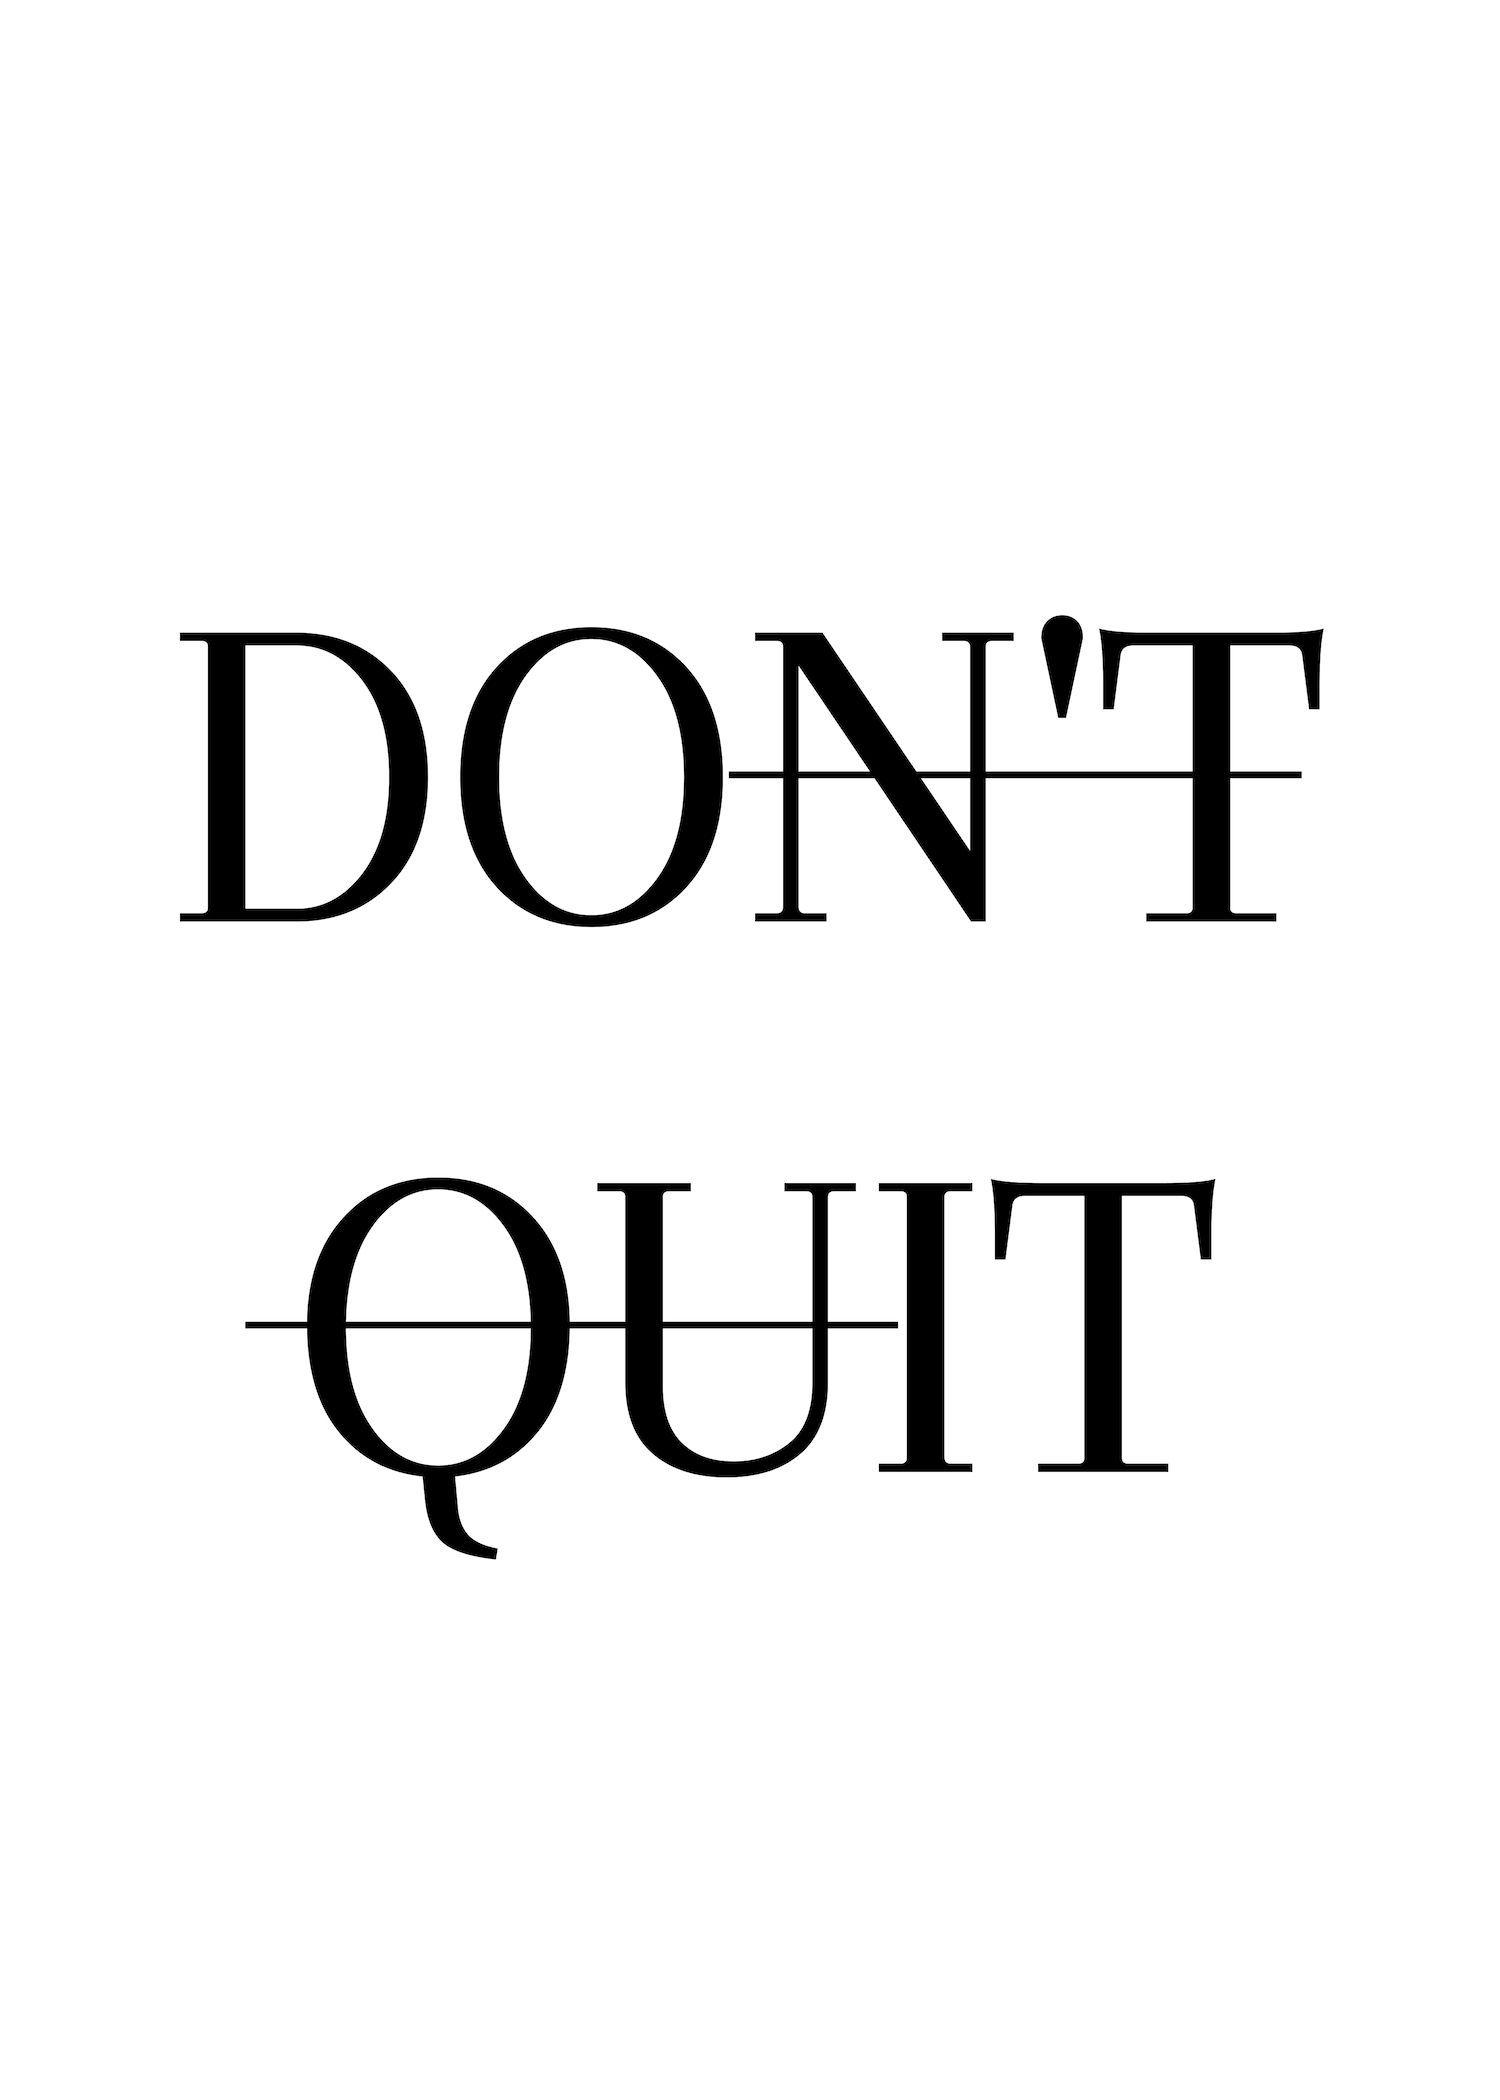 Dont Quit wallpaper by uachuadhry  Download on ZEDGE  f24f